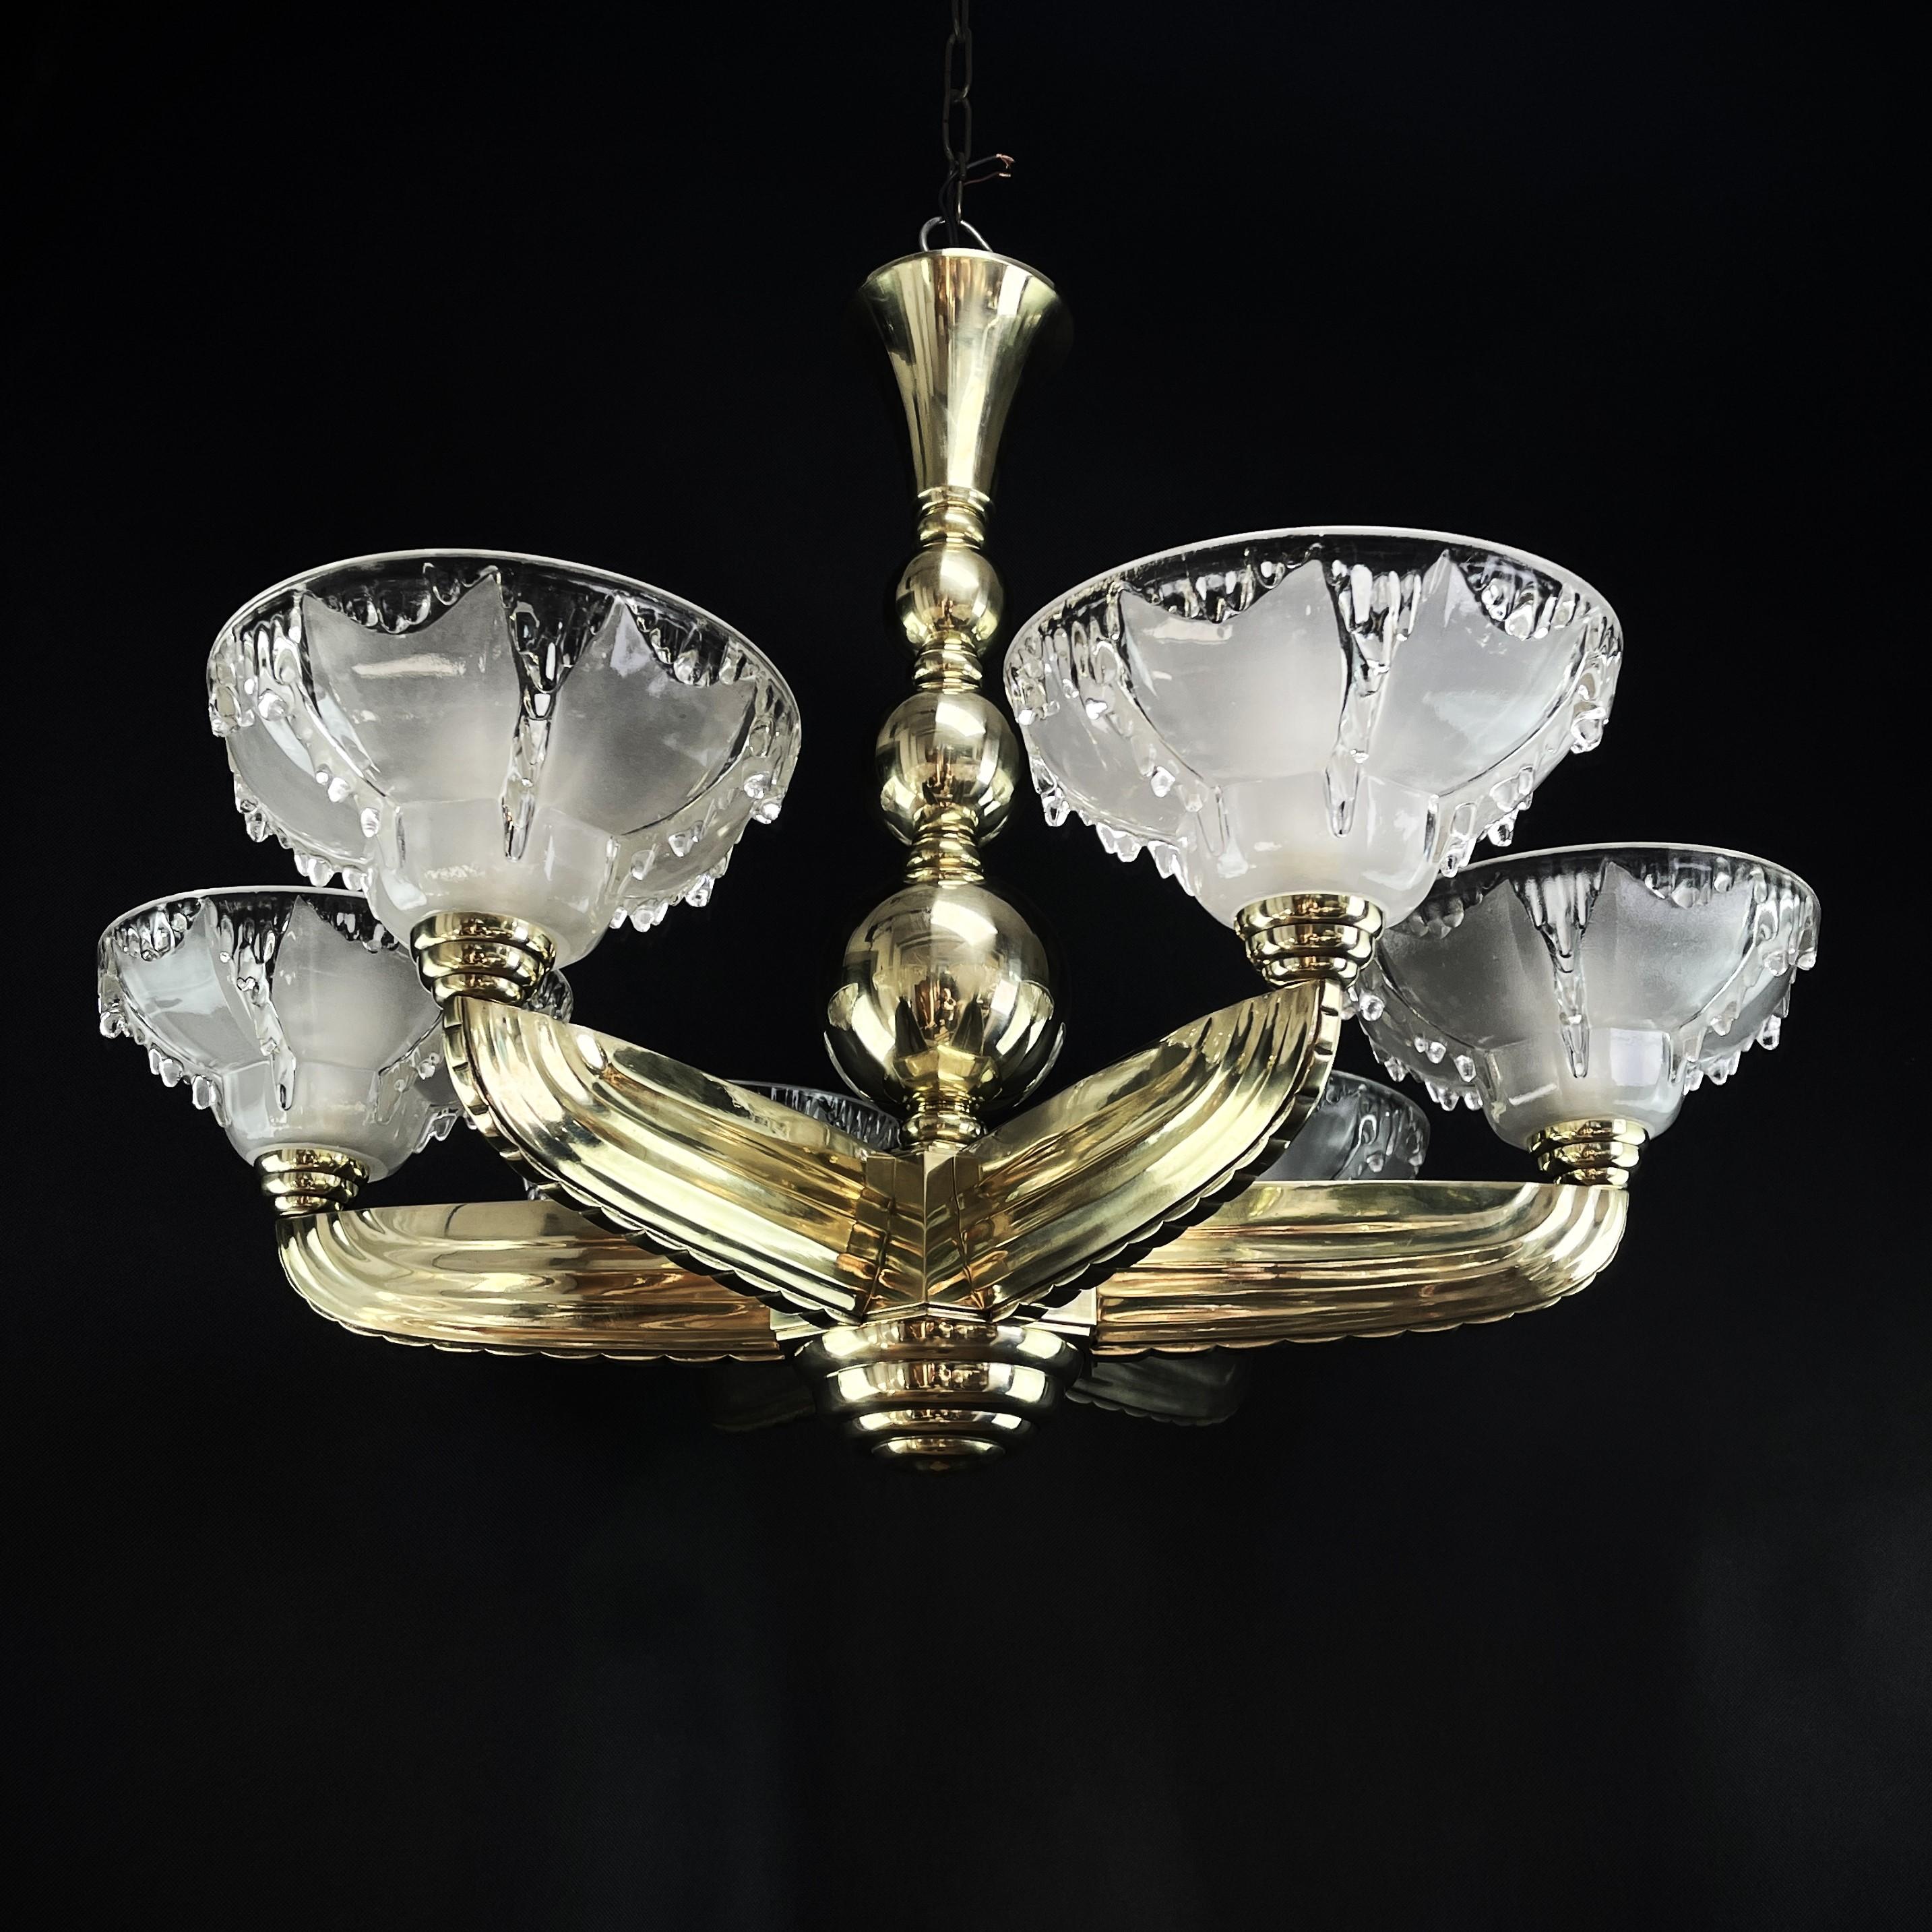 Art Deco chandelier - Pretitot and EZAN - 1930s

The Petitot Art Deco chandelier is an elegant and stylish lighting object from the Art Deco period. It is made of bronze and has unique design elements that make the chandelier a special work of